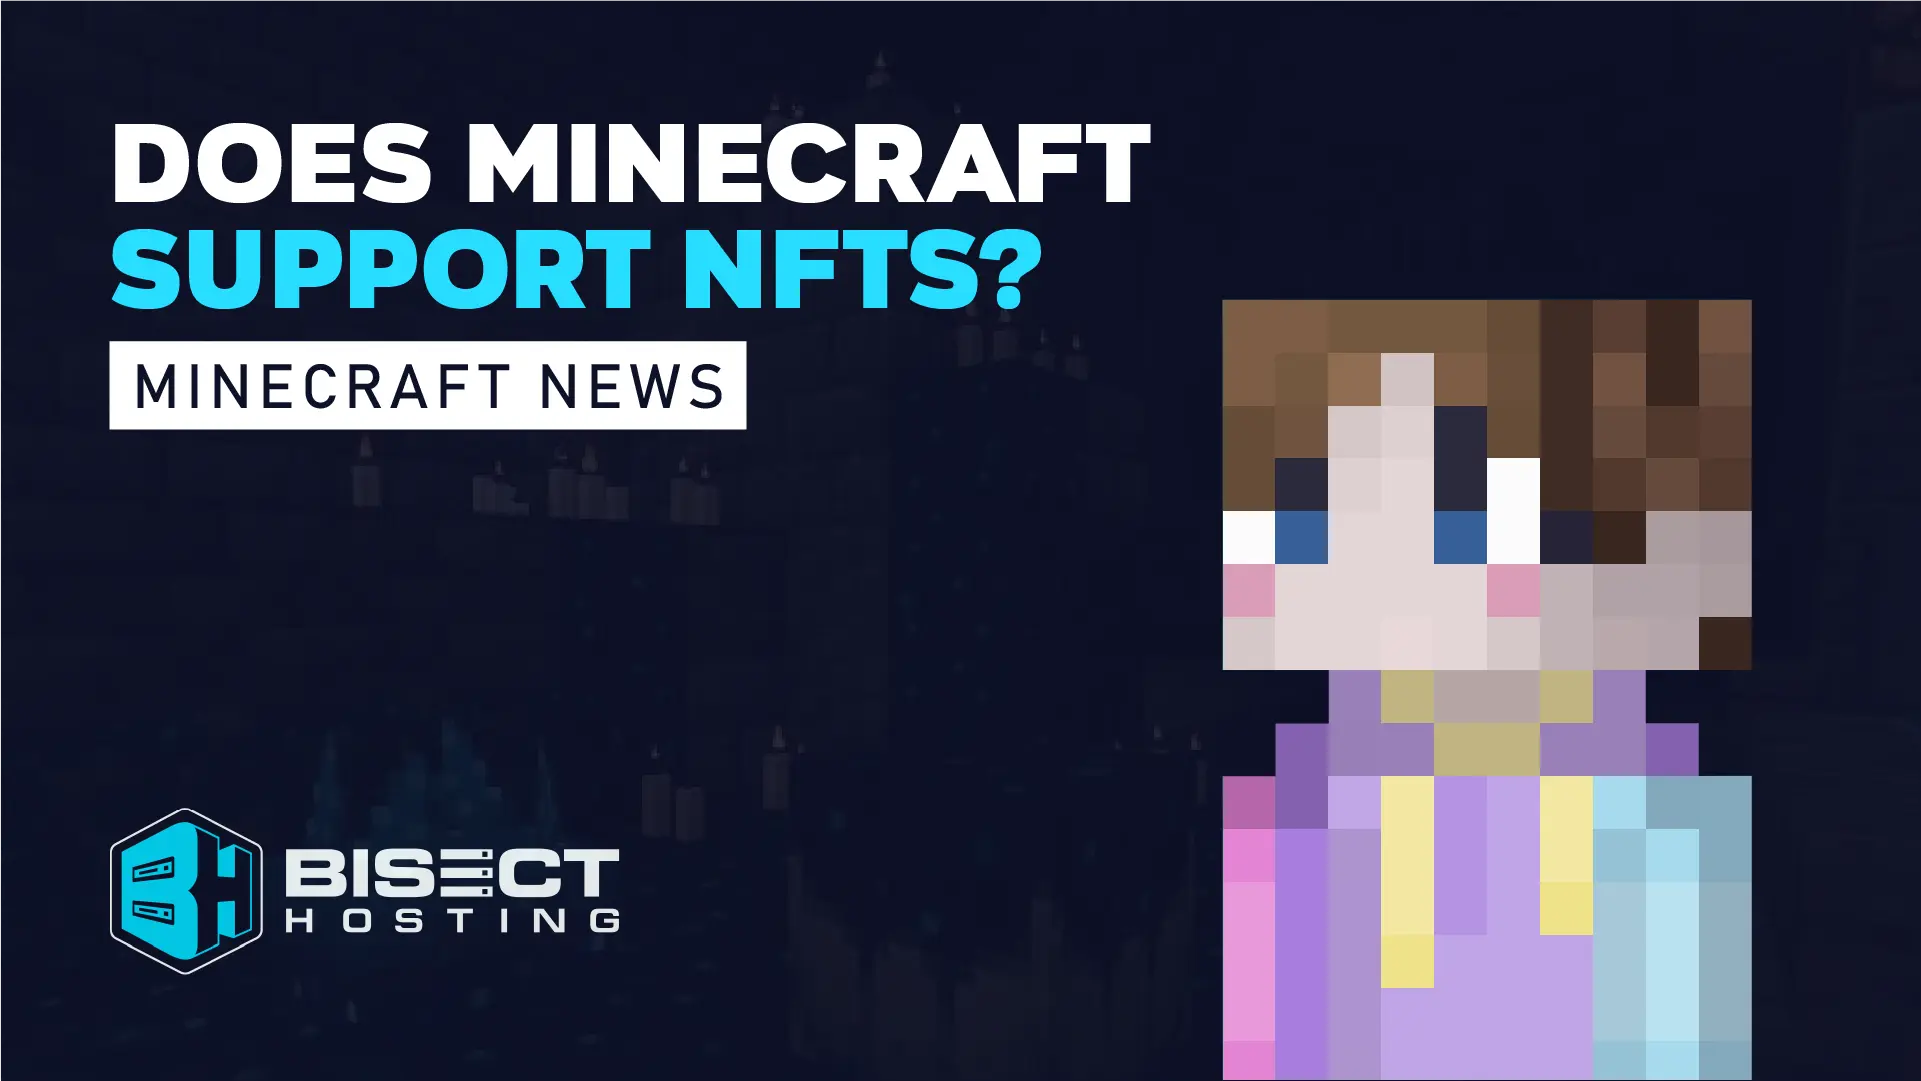 Does Minecraft Support NFTs?